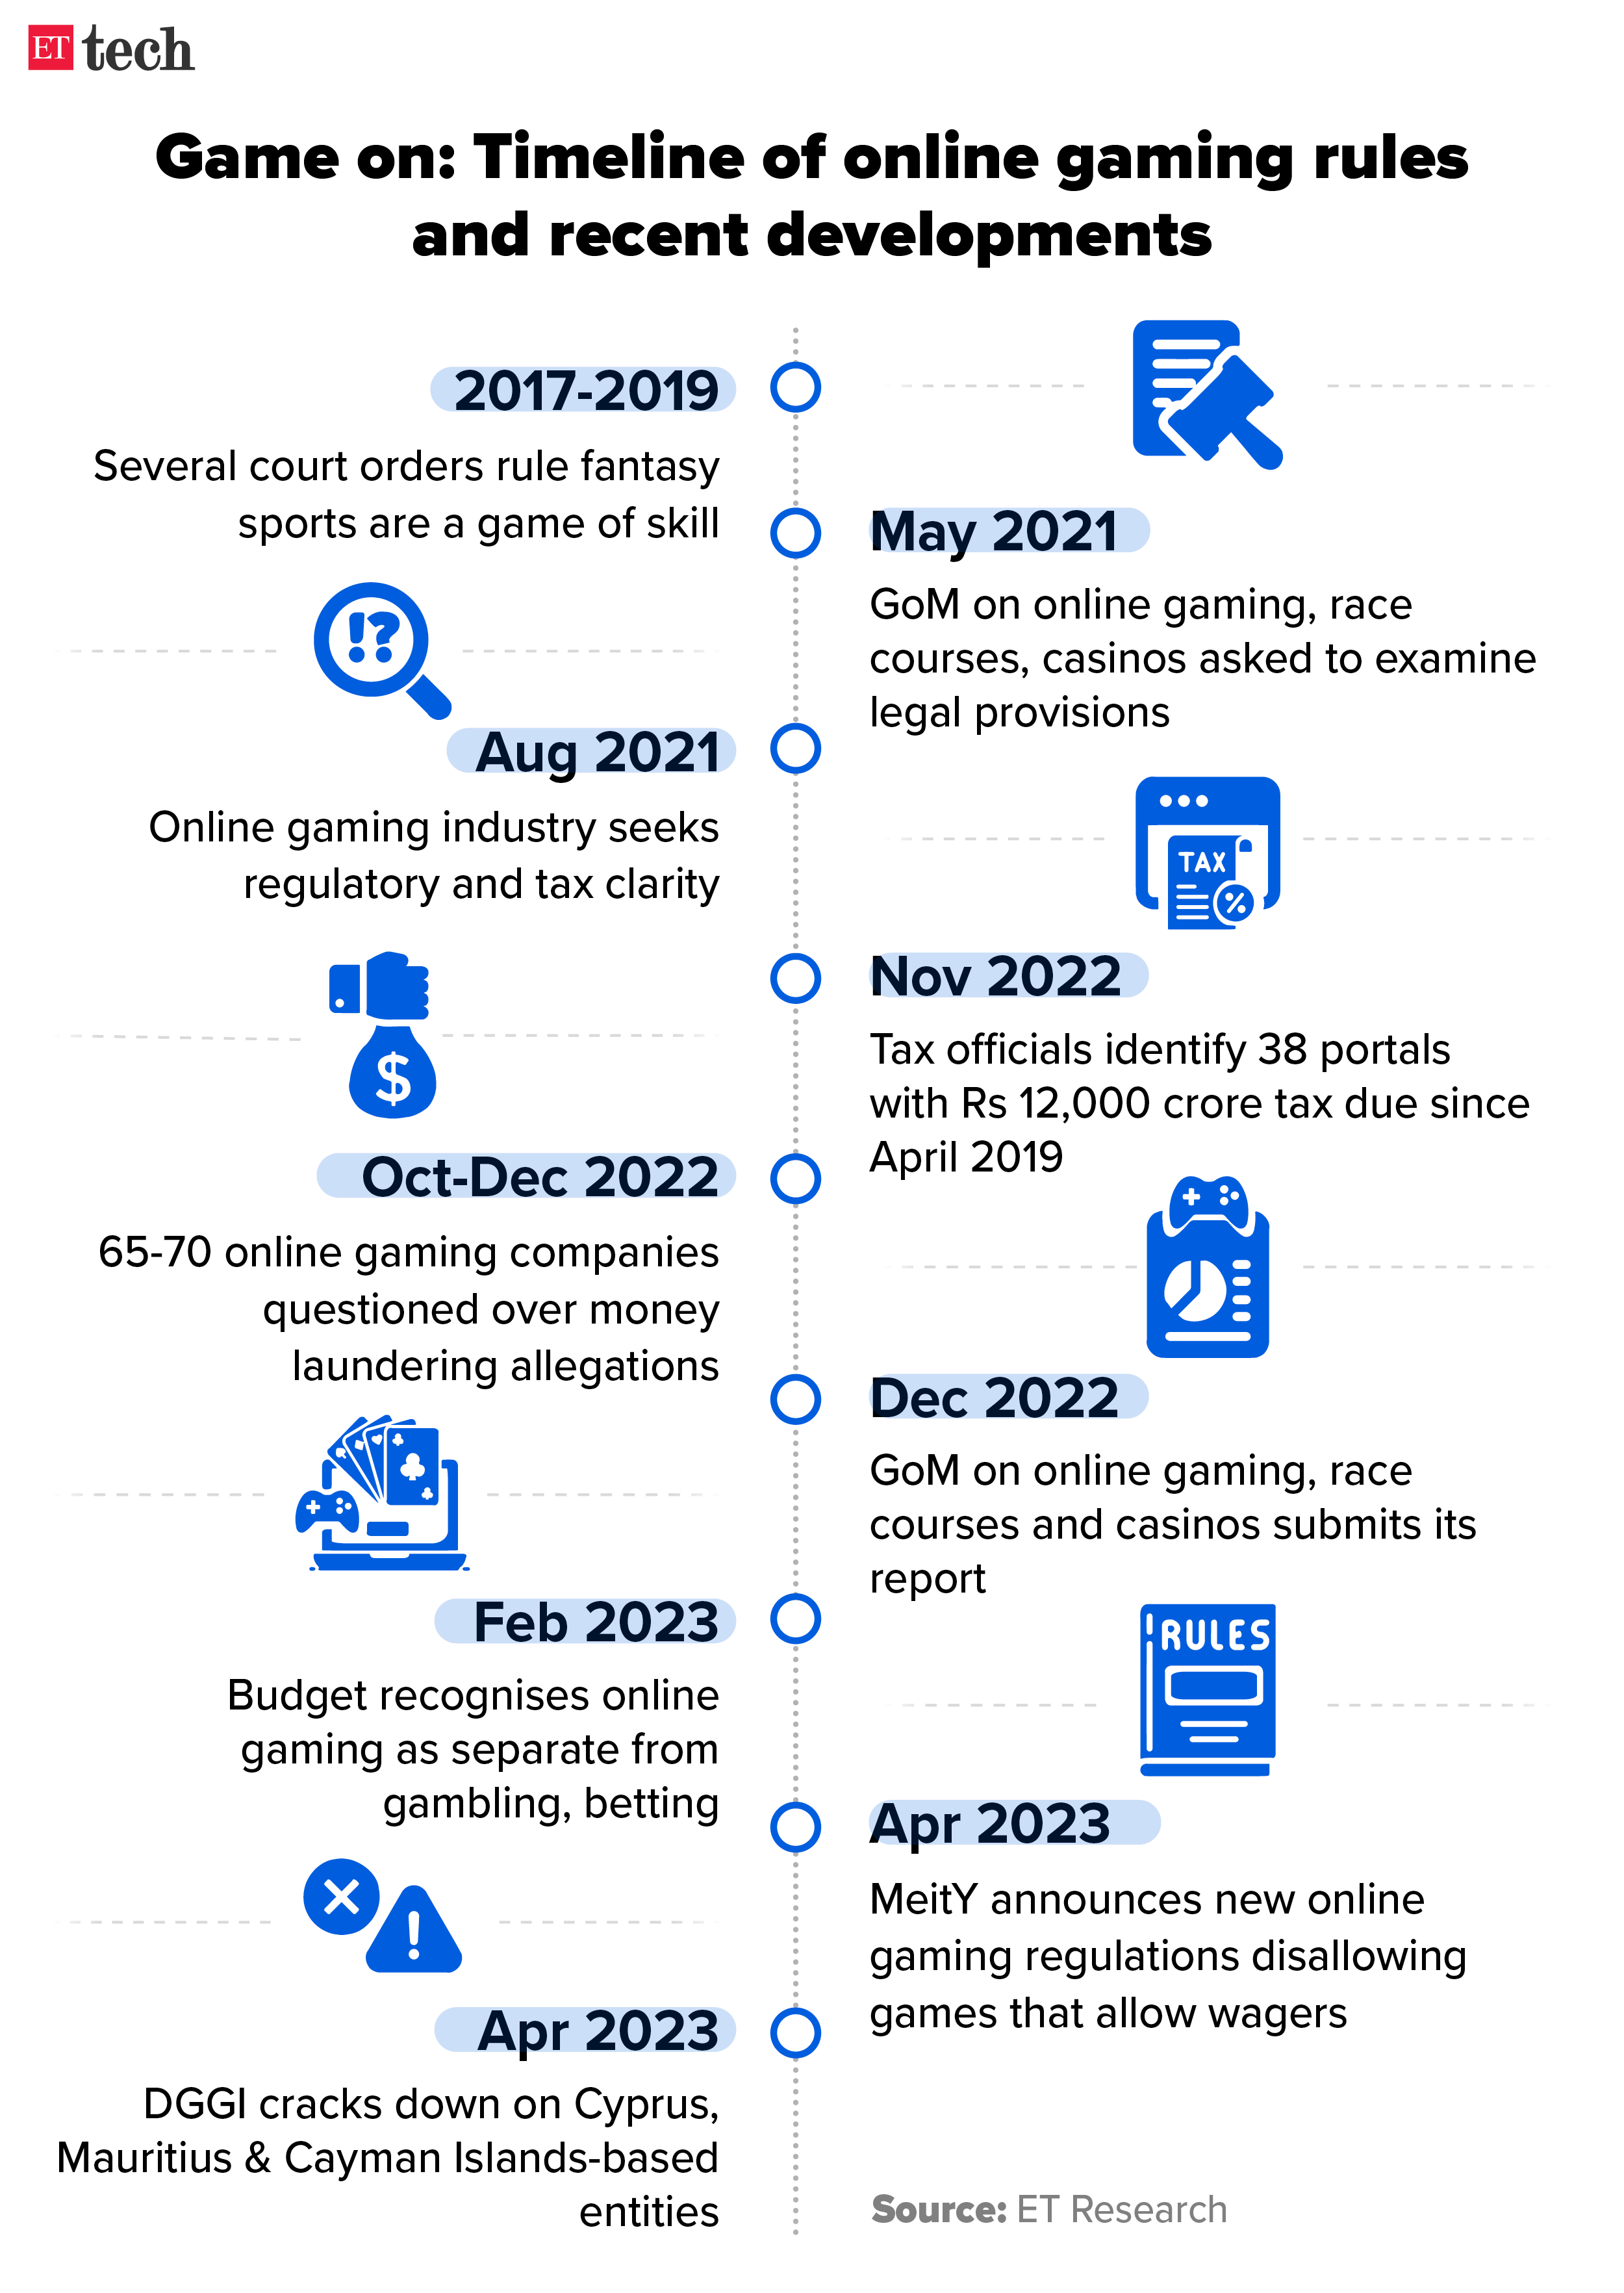 Game on- Timeline of online gaming rules and recent developments_Timeline_Graphic_ETTECH